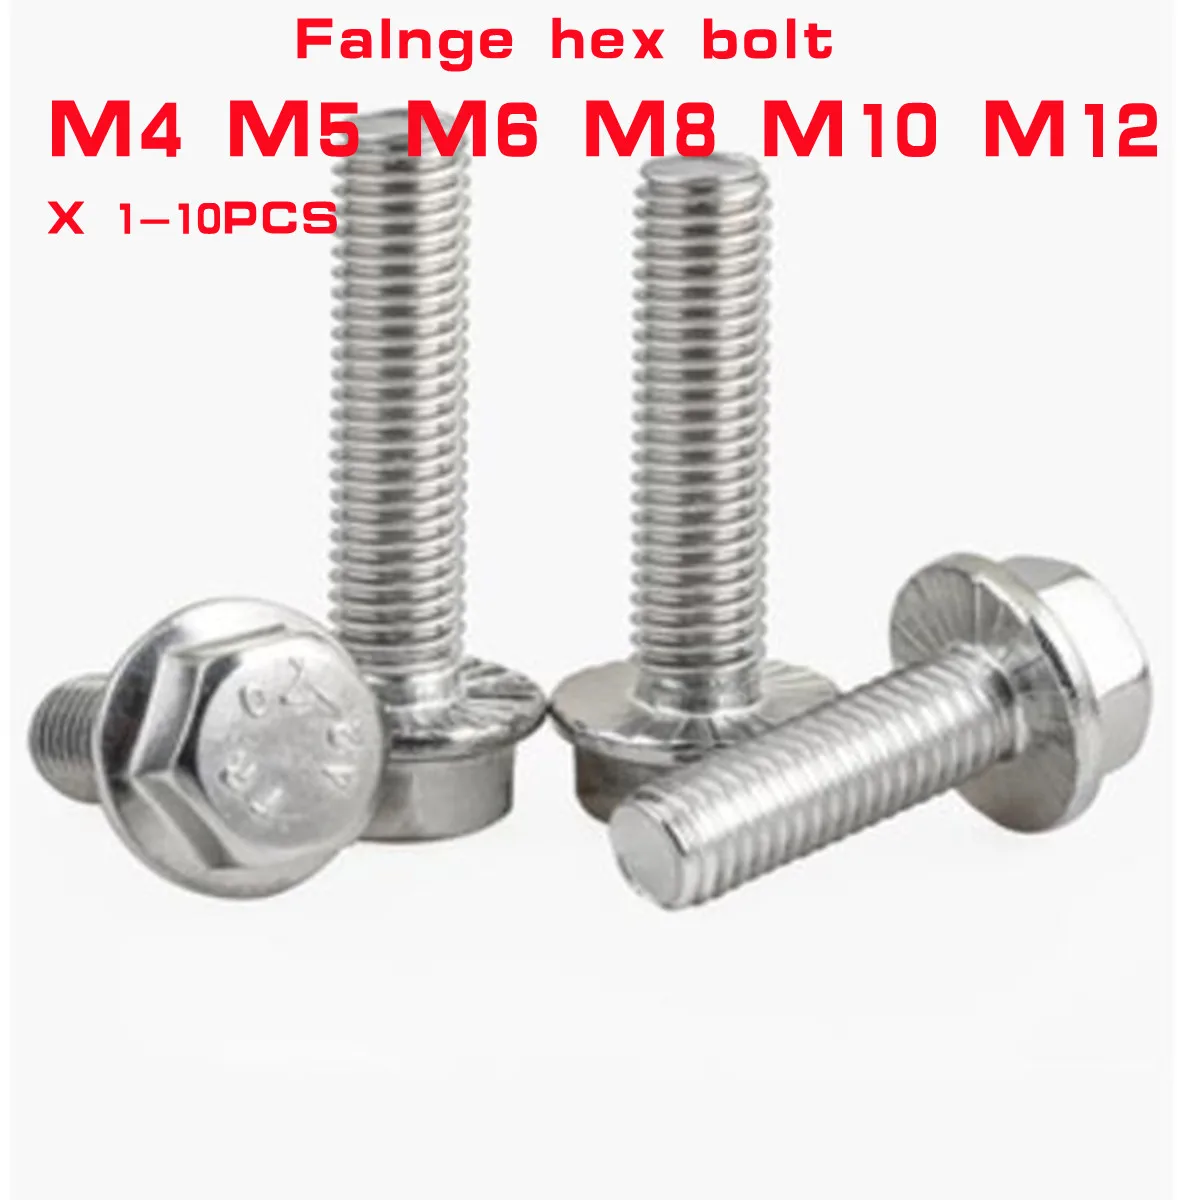 

1/10pcs M5 M6 M8 M10 M12 A2-70 304 Stainless Steel GB5787 Hexagon Head with Serrated Flange Cap Screw Hex Washer Head Bolt